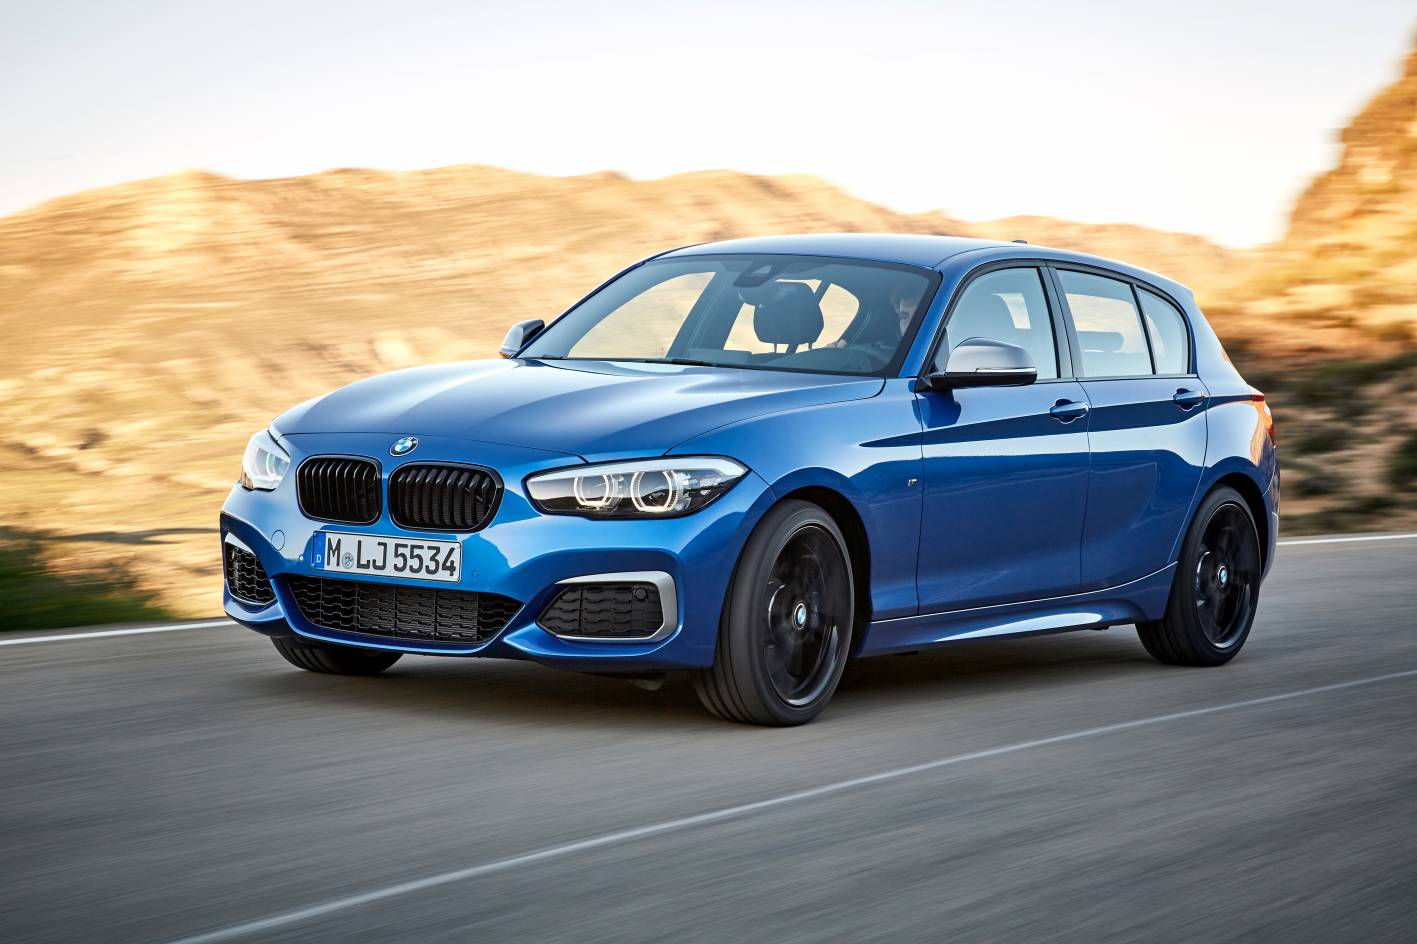 2017 BMW 1 Series update announced, last RWD before FWD model arrives